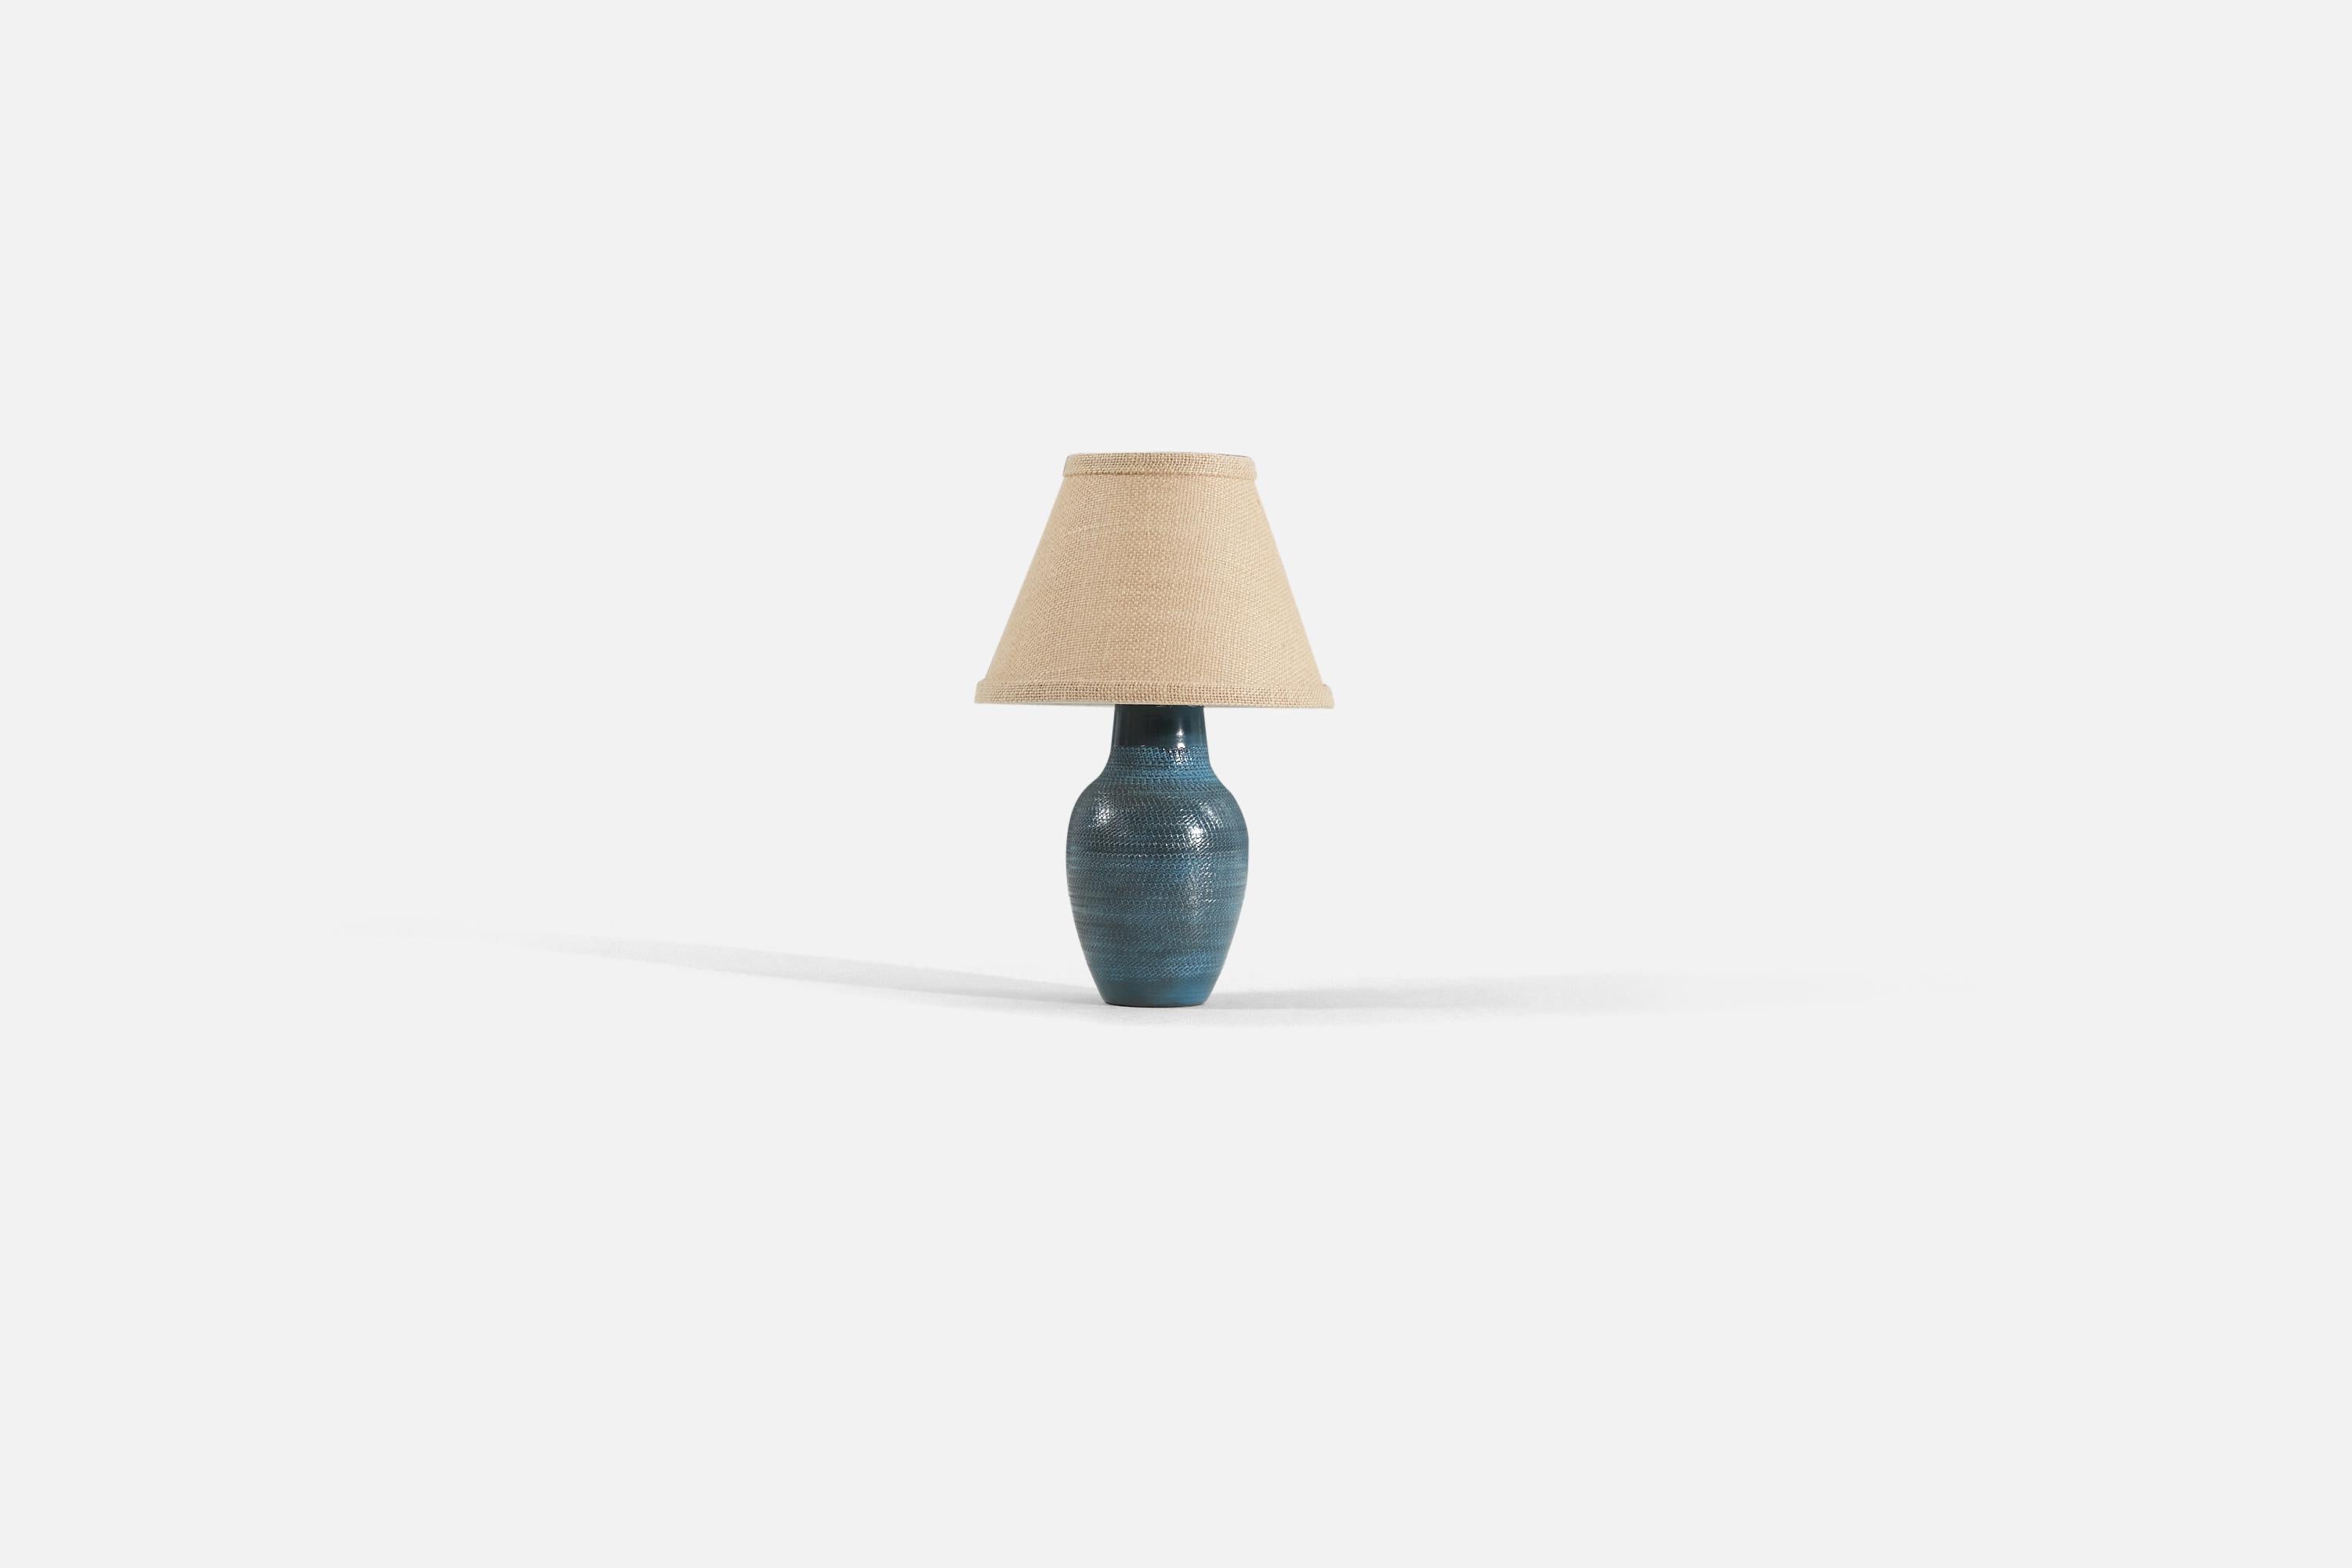 A blue glazed earthenware table lamp designed by Ingrid Atterberg and produced by Upsala-Ekeby, Sweden, c. 1950s. 

Measurements listed are of lamp. Sold without lampshade.

For reference:

Shade : 4.25 x 8.25 x 6
Lamp with shade : 12.5 x 8.25 x 8.25